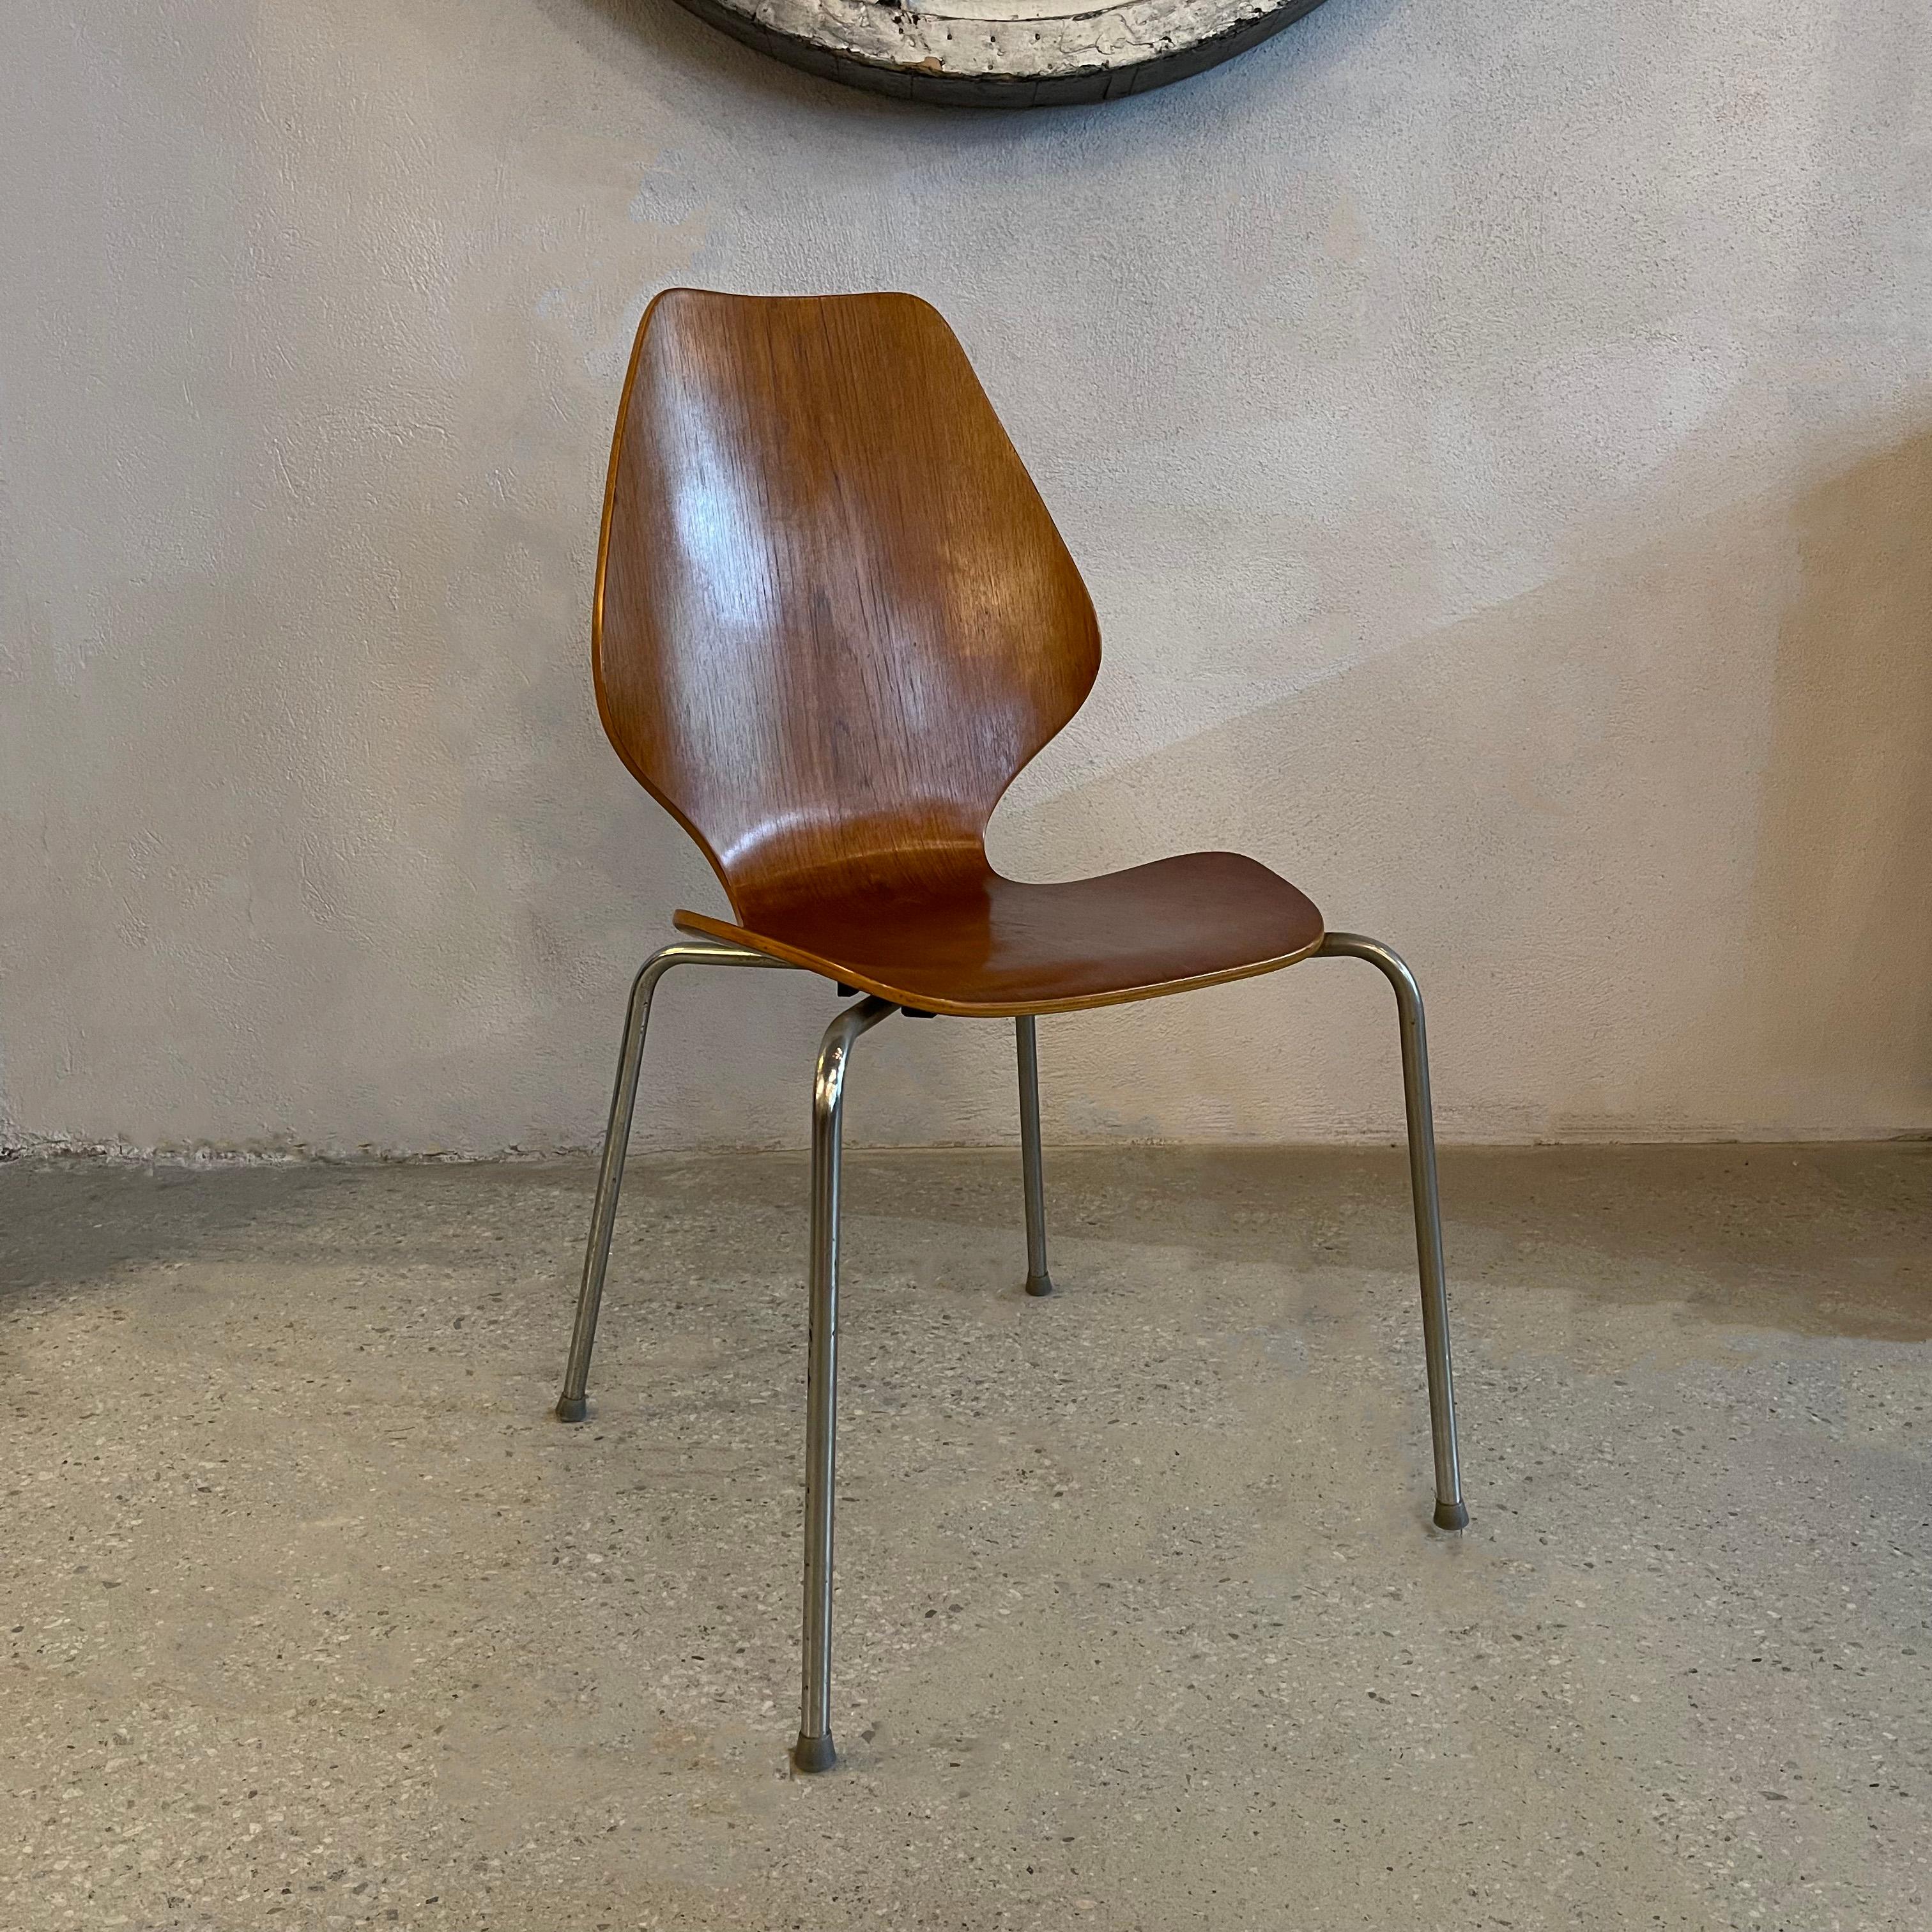 Scandinavian modern, bentwood side chair in the style of Arne Jacobsen features a curvaceous, steam bent wood seat with chrome legs. A wonderful desk, dining or accent chair. 